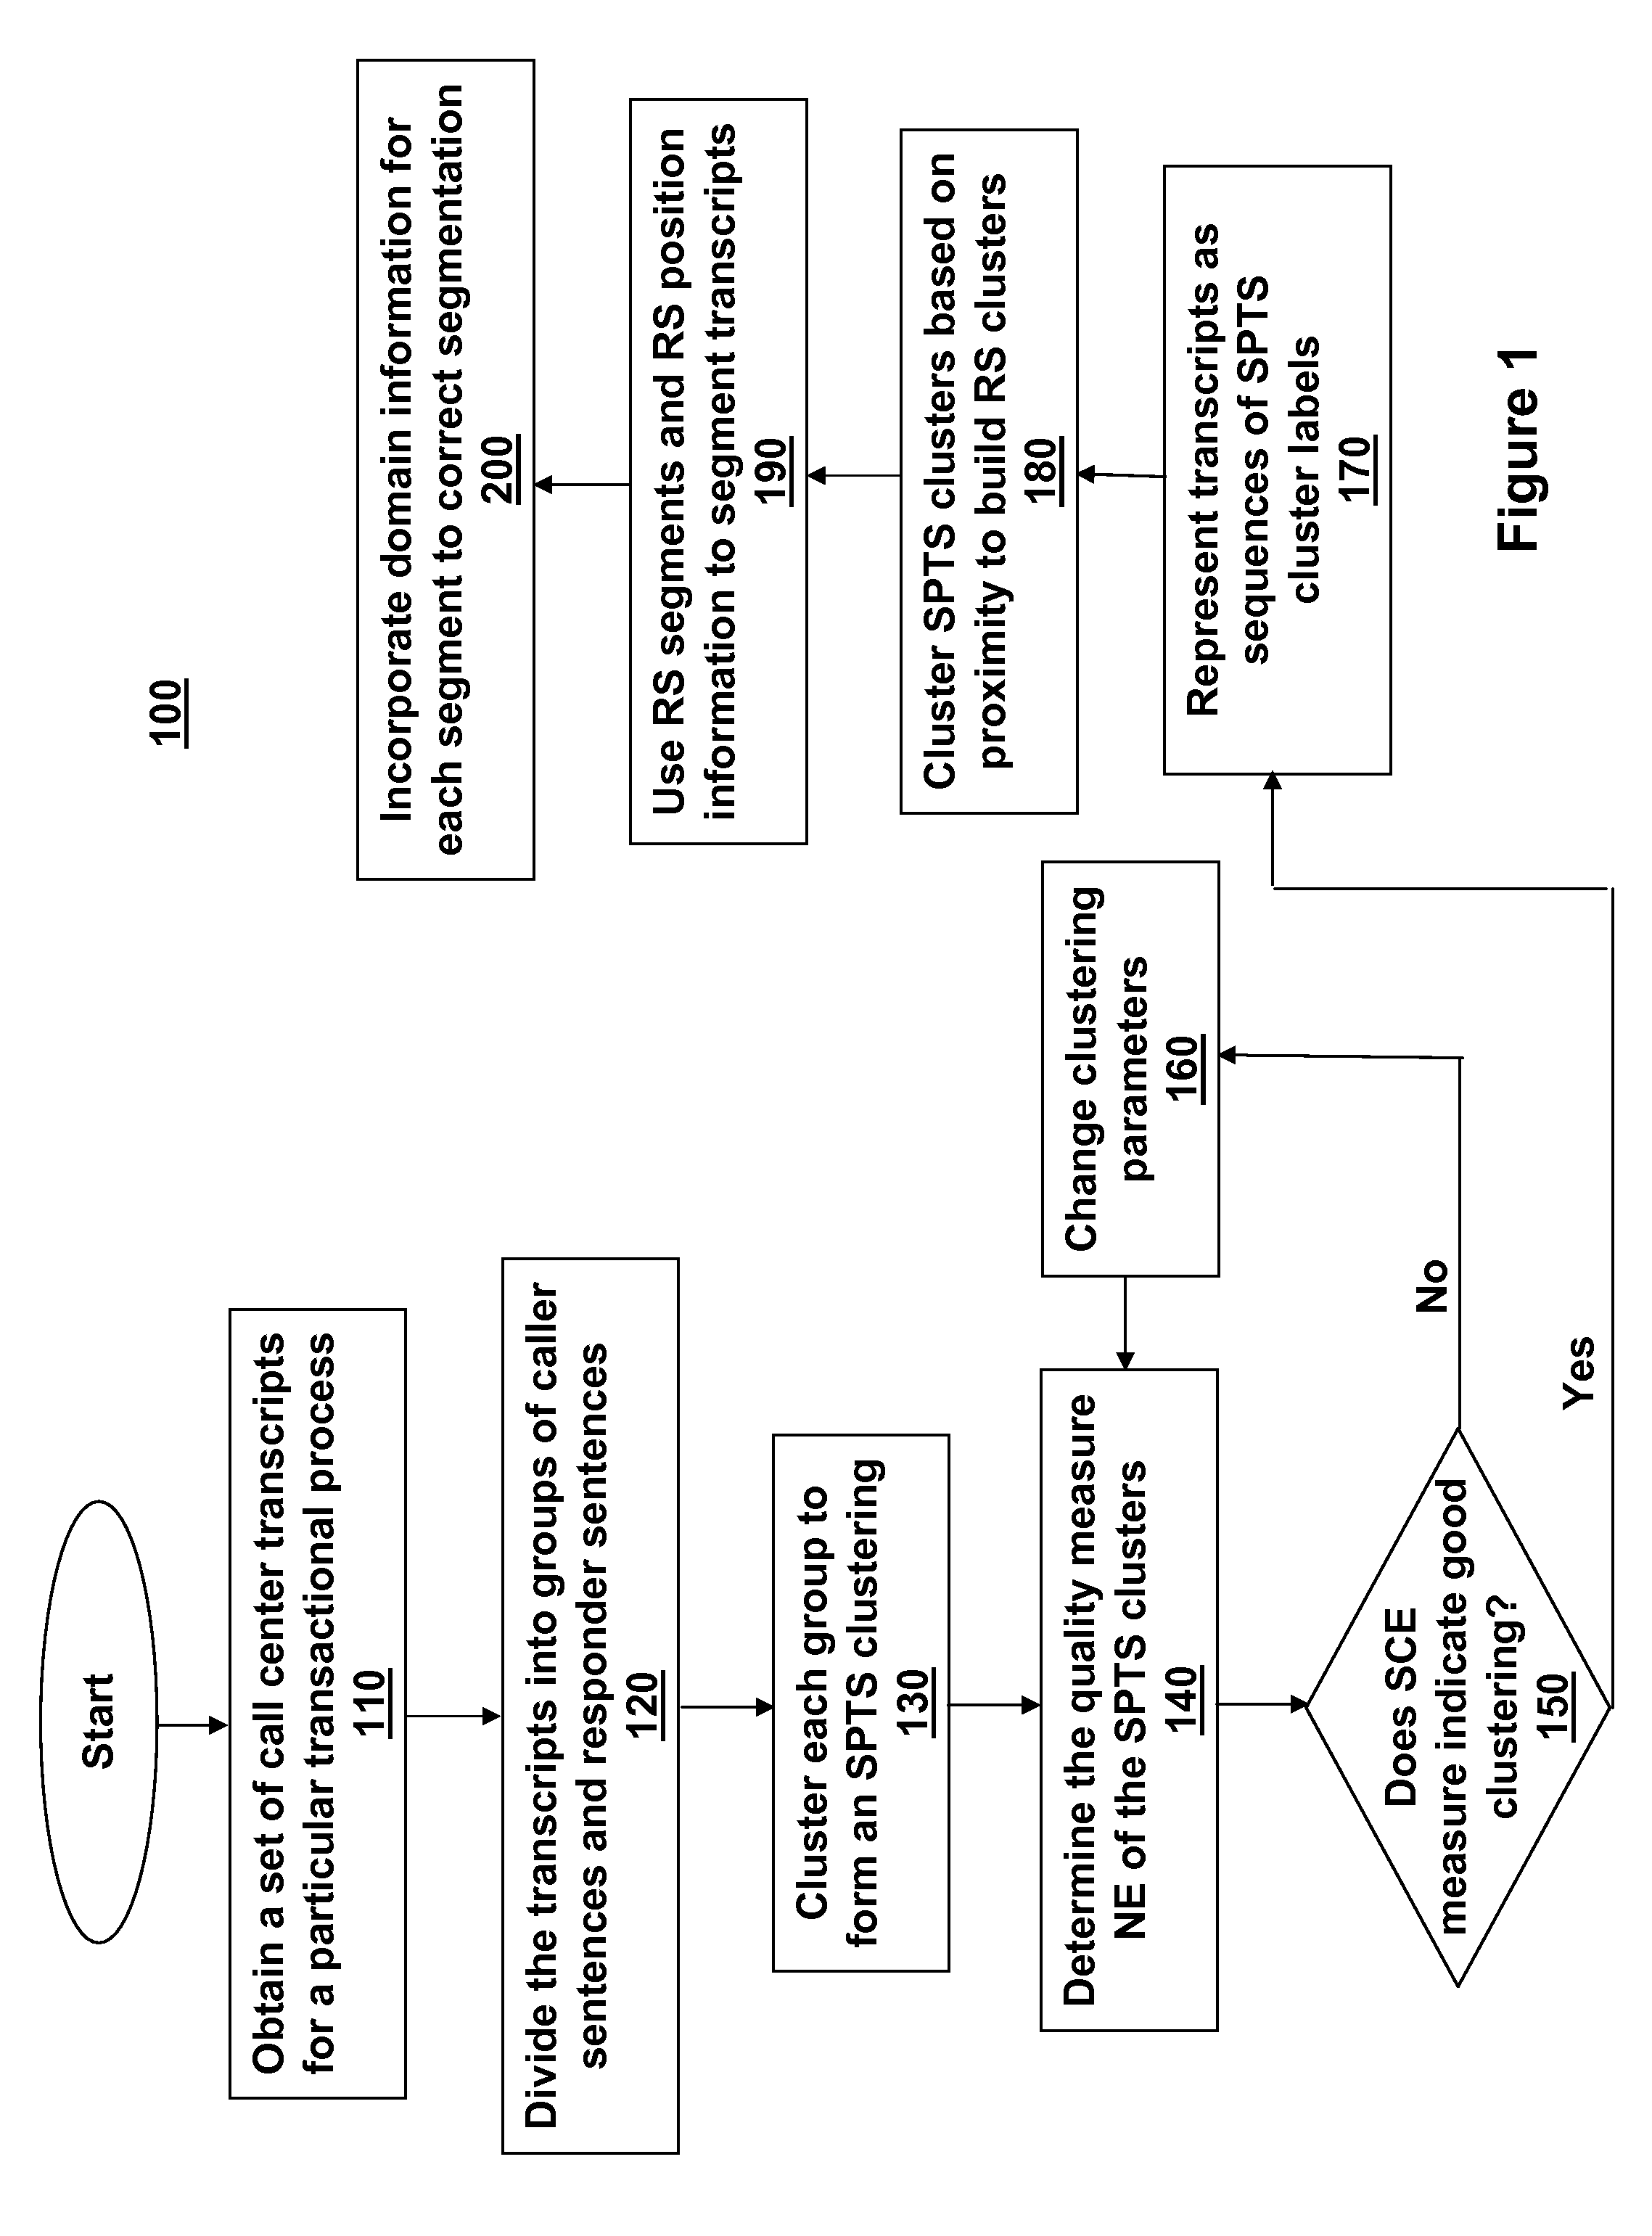 Method for segmenting communication transcripts using unsupervised and semi-supervised techniques